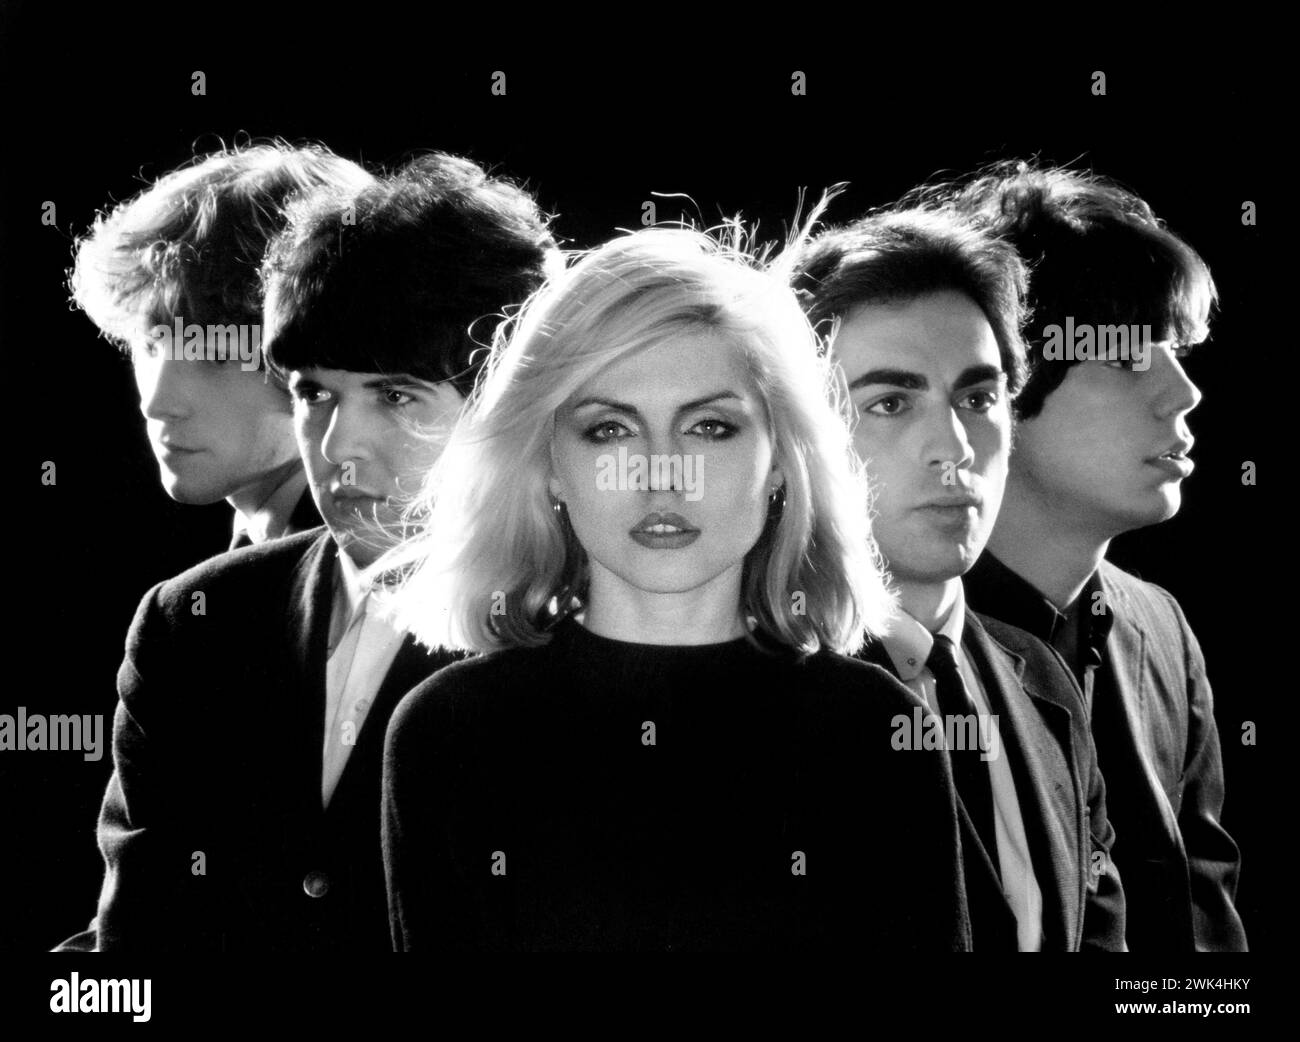 Blondie. Portrait of Debbie Harry and other members of the pop group, Blondie, 1977. From left to right: Gary Valentine, Clem Burke, Debbie Harry, Chris Stein, Jimmy Destri Stock Photo